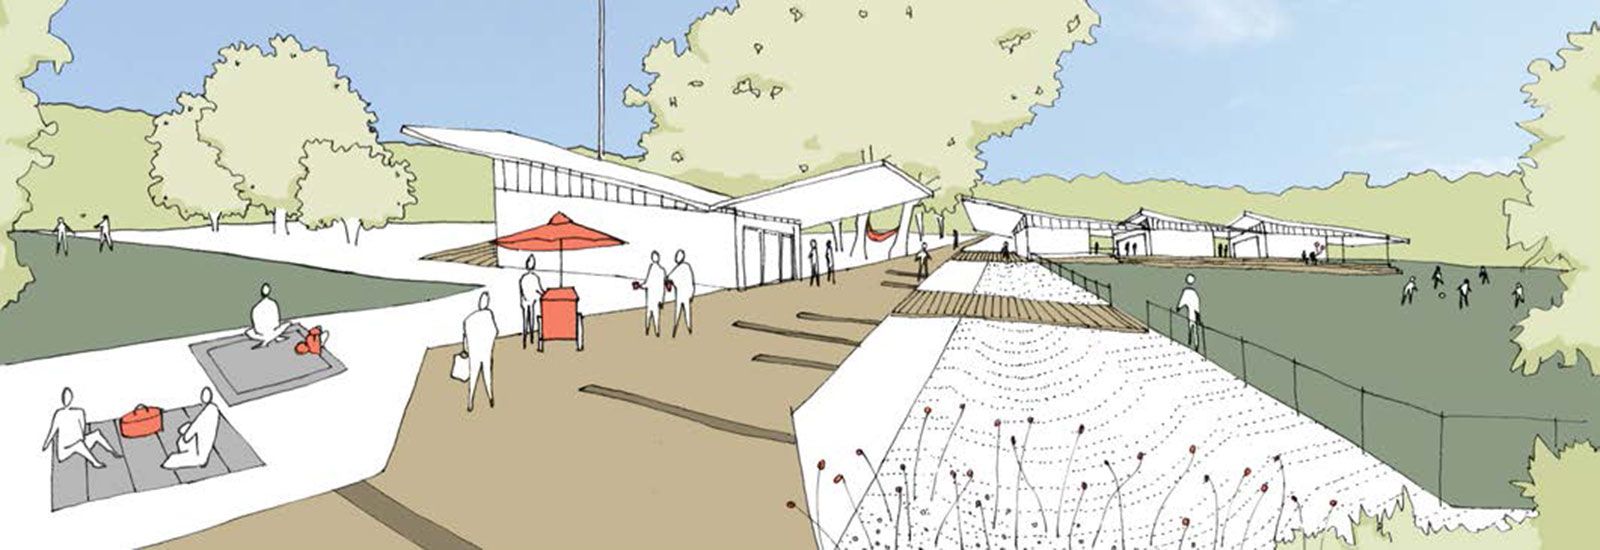 Concept design from the Tomaree Sports Complex Masterplan banner image